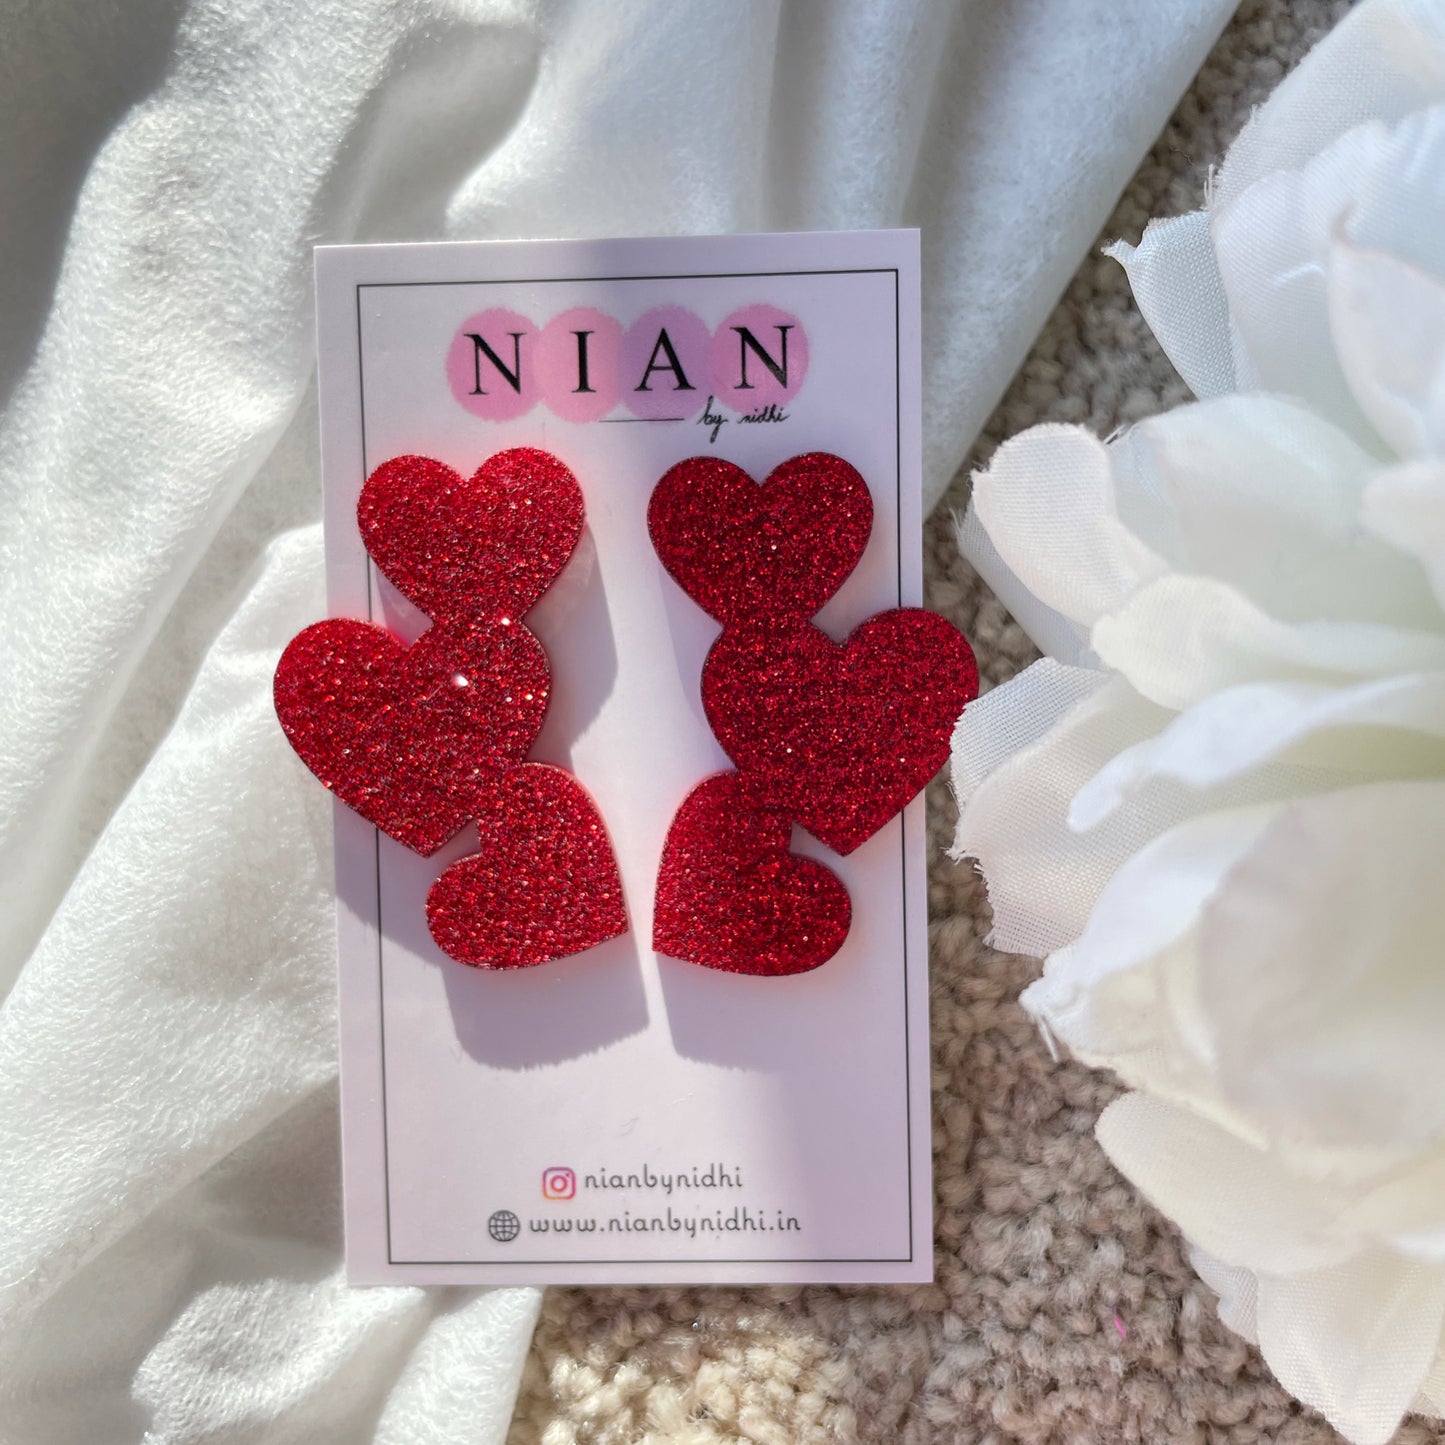 Tri Heart Earrings - made of 3 shimmering Red hearts - Nian by Nidhi - in a white background, placed on Nian by Nidhi Earring cards